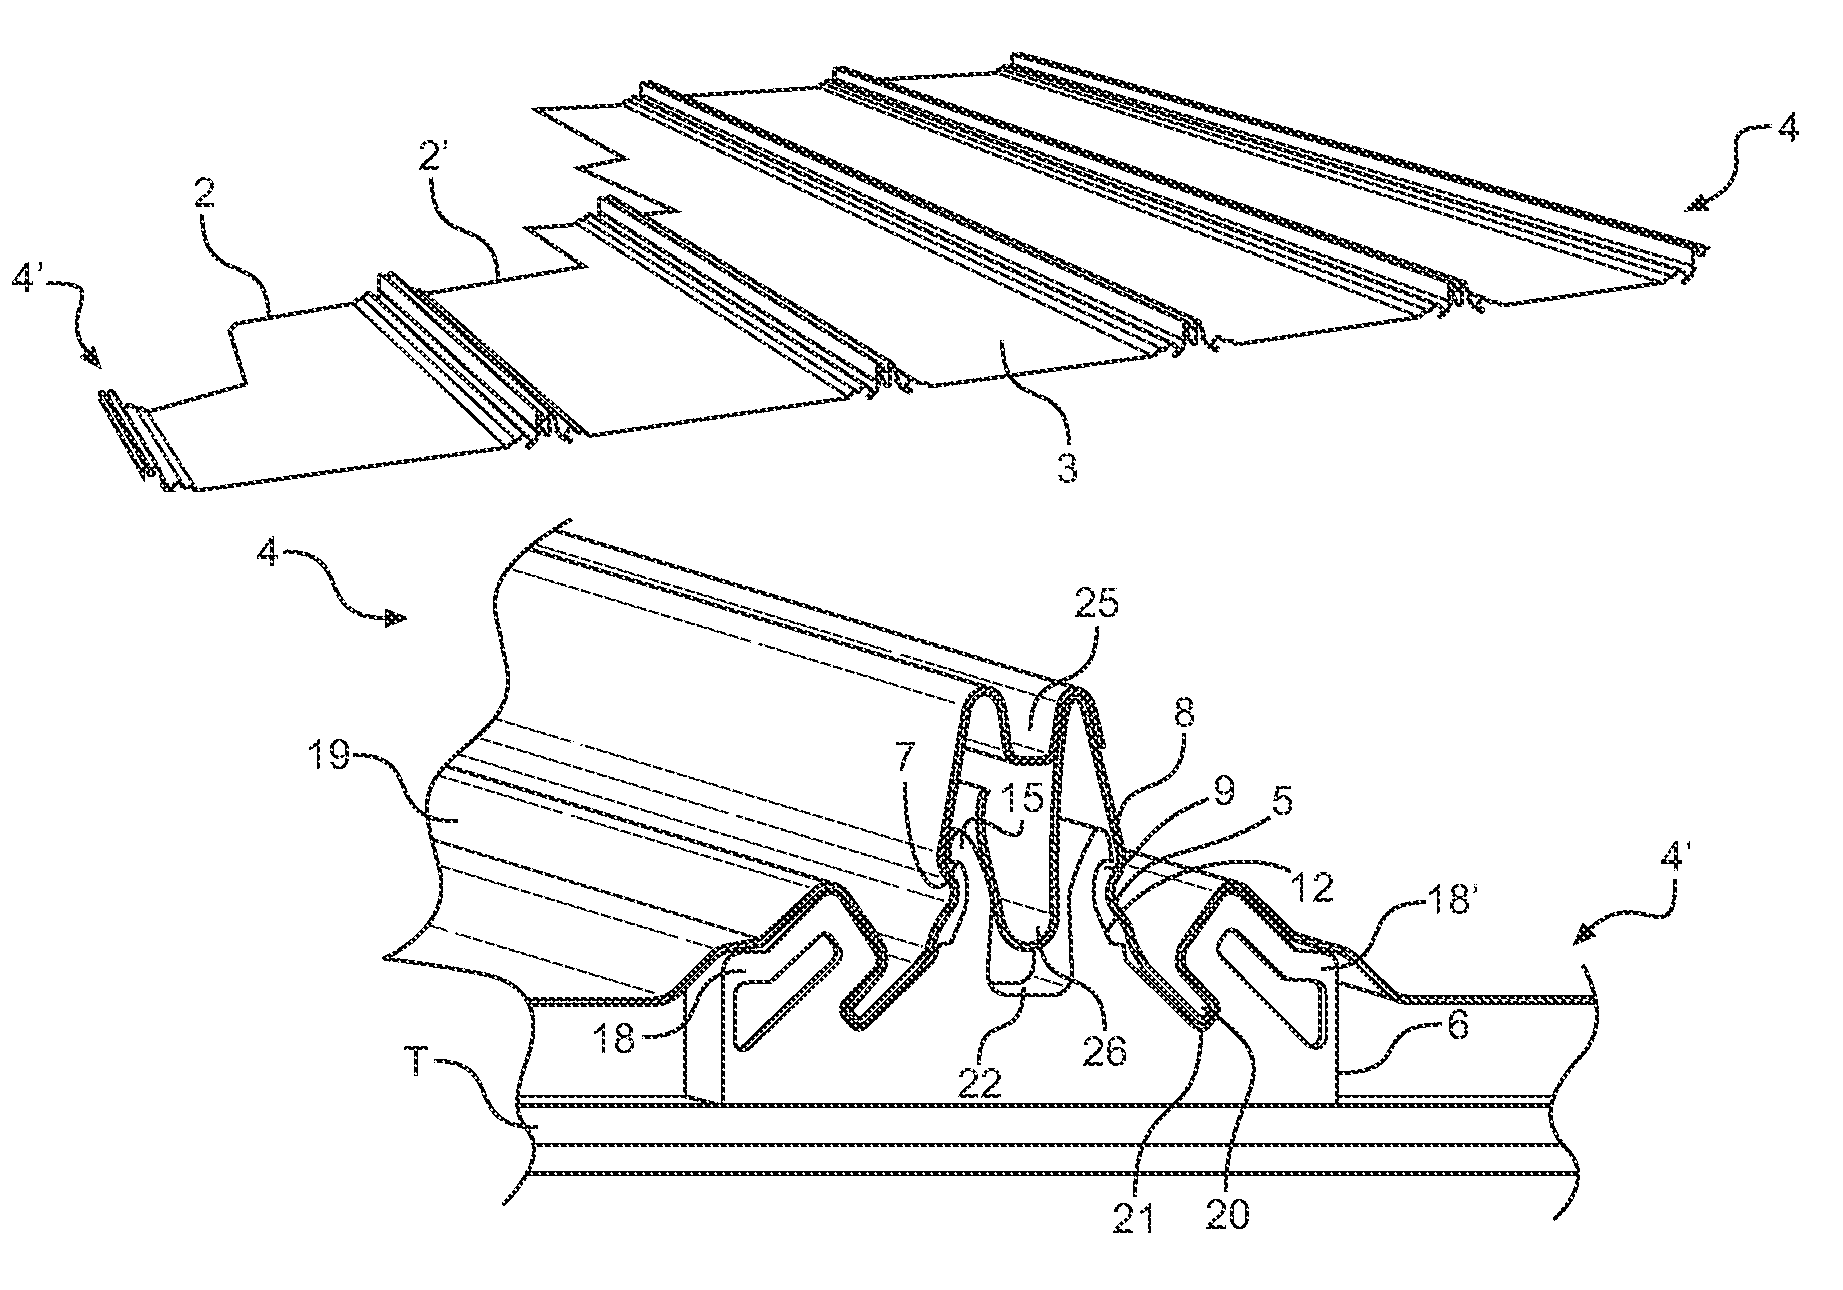 Roofing assembly including sheet panels having side edge portions with projections mating with grooves on brackets anchored to roof